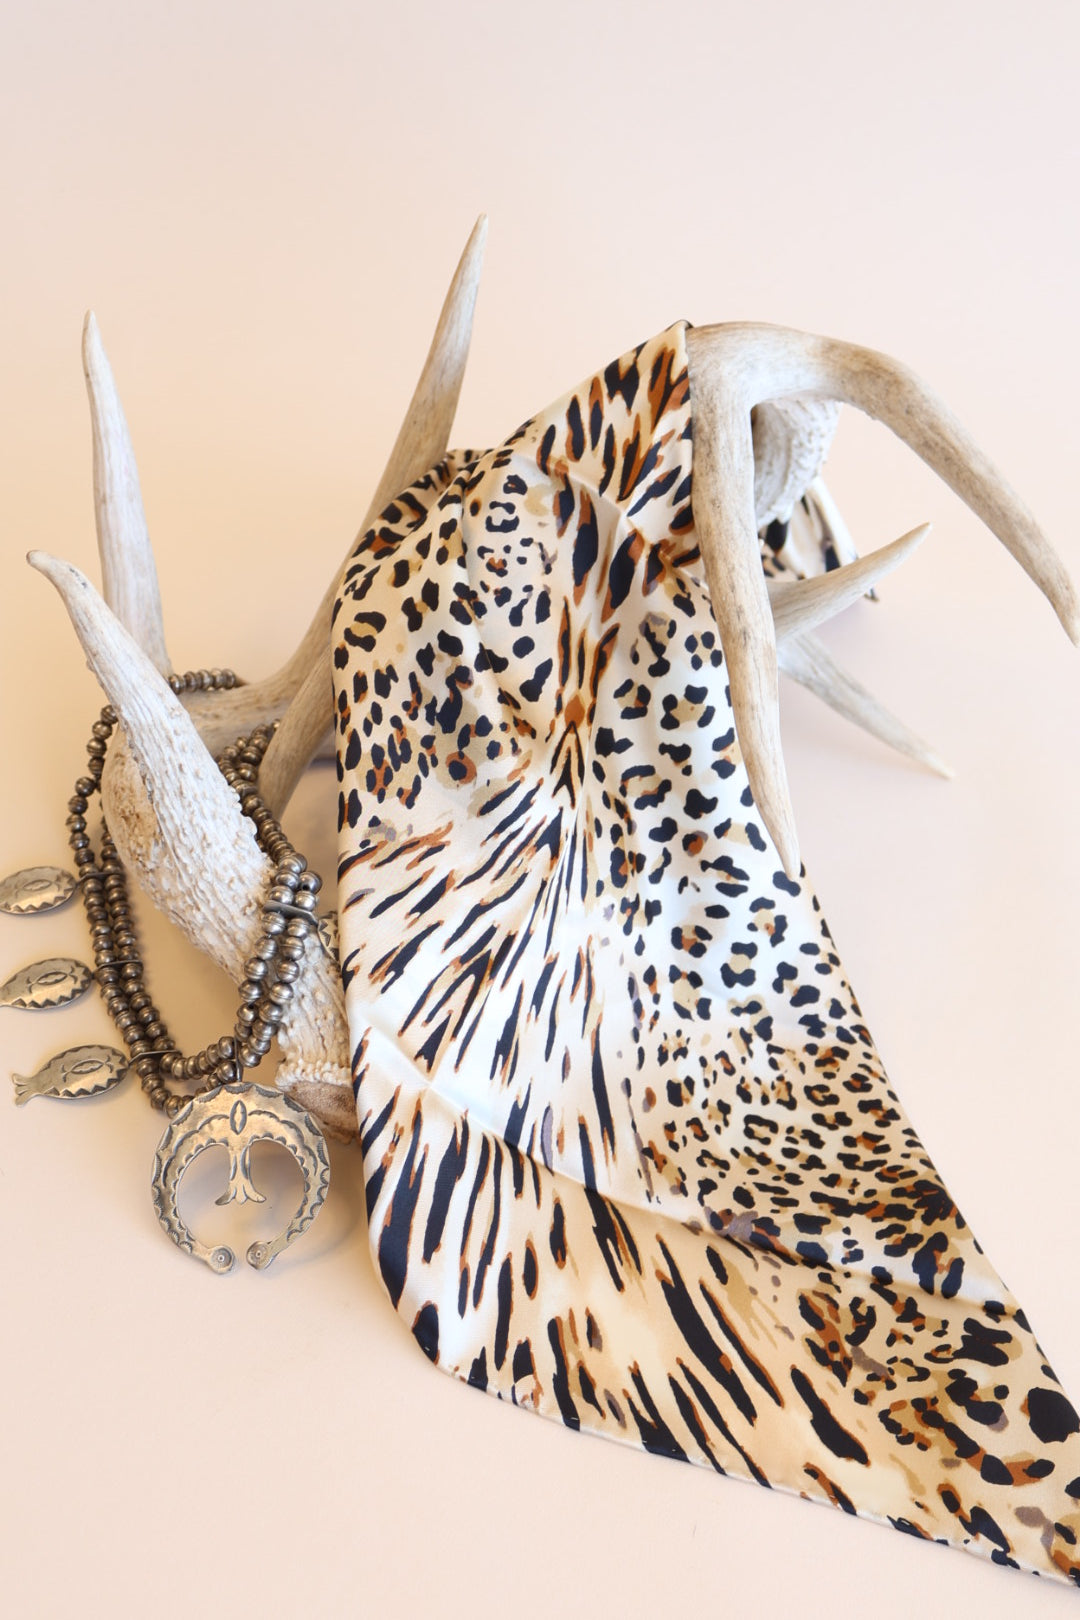 The Leopard Lady Scarf